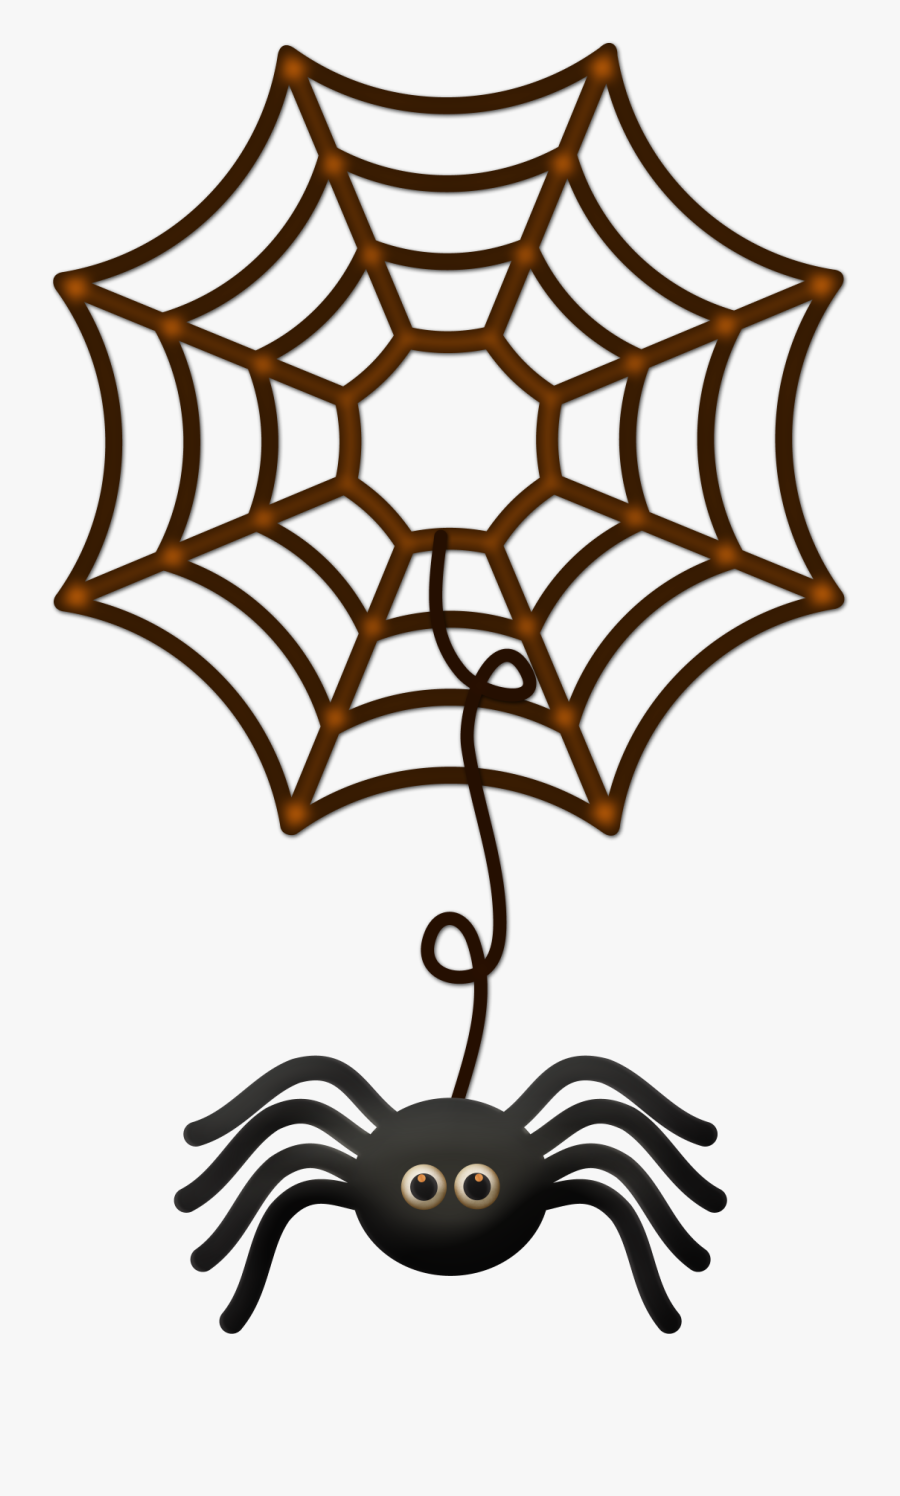 Indoors On Dirt/sand Mix - Spider Web Icon Vector, Transparent Clipart